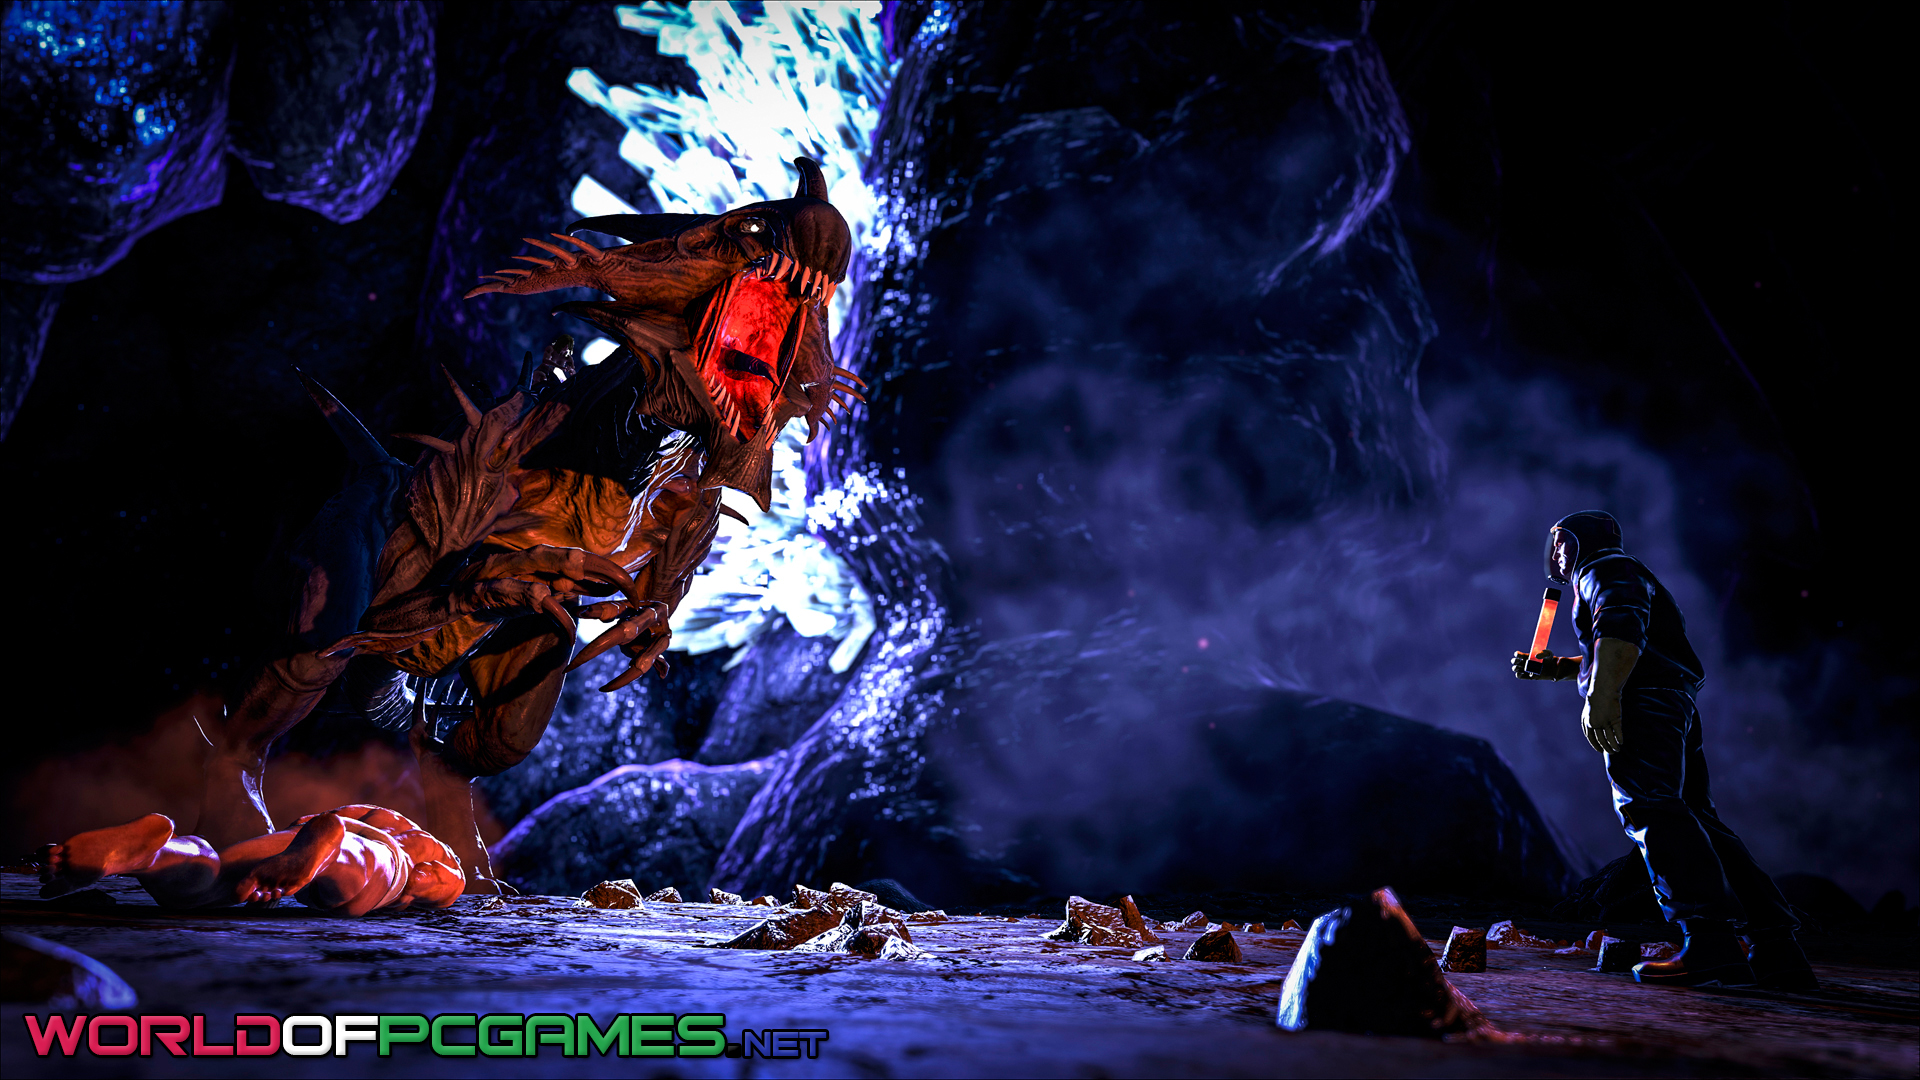 Ark Survival Aberration Free Download PC Game By worldof-pcgames.netm